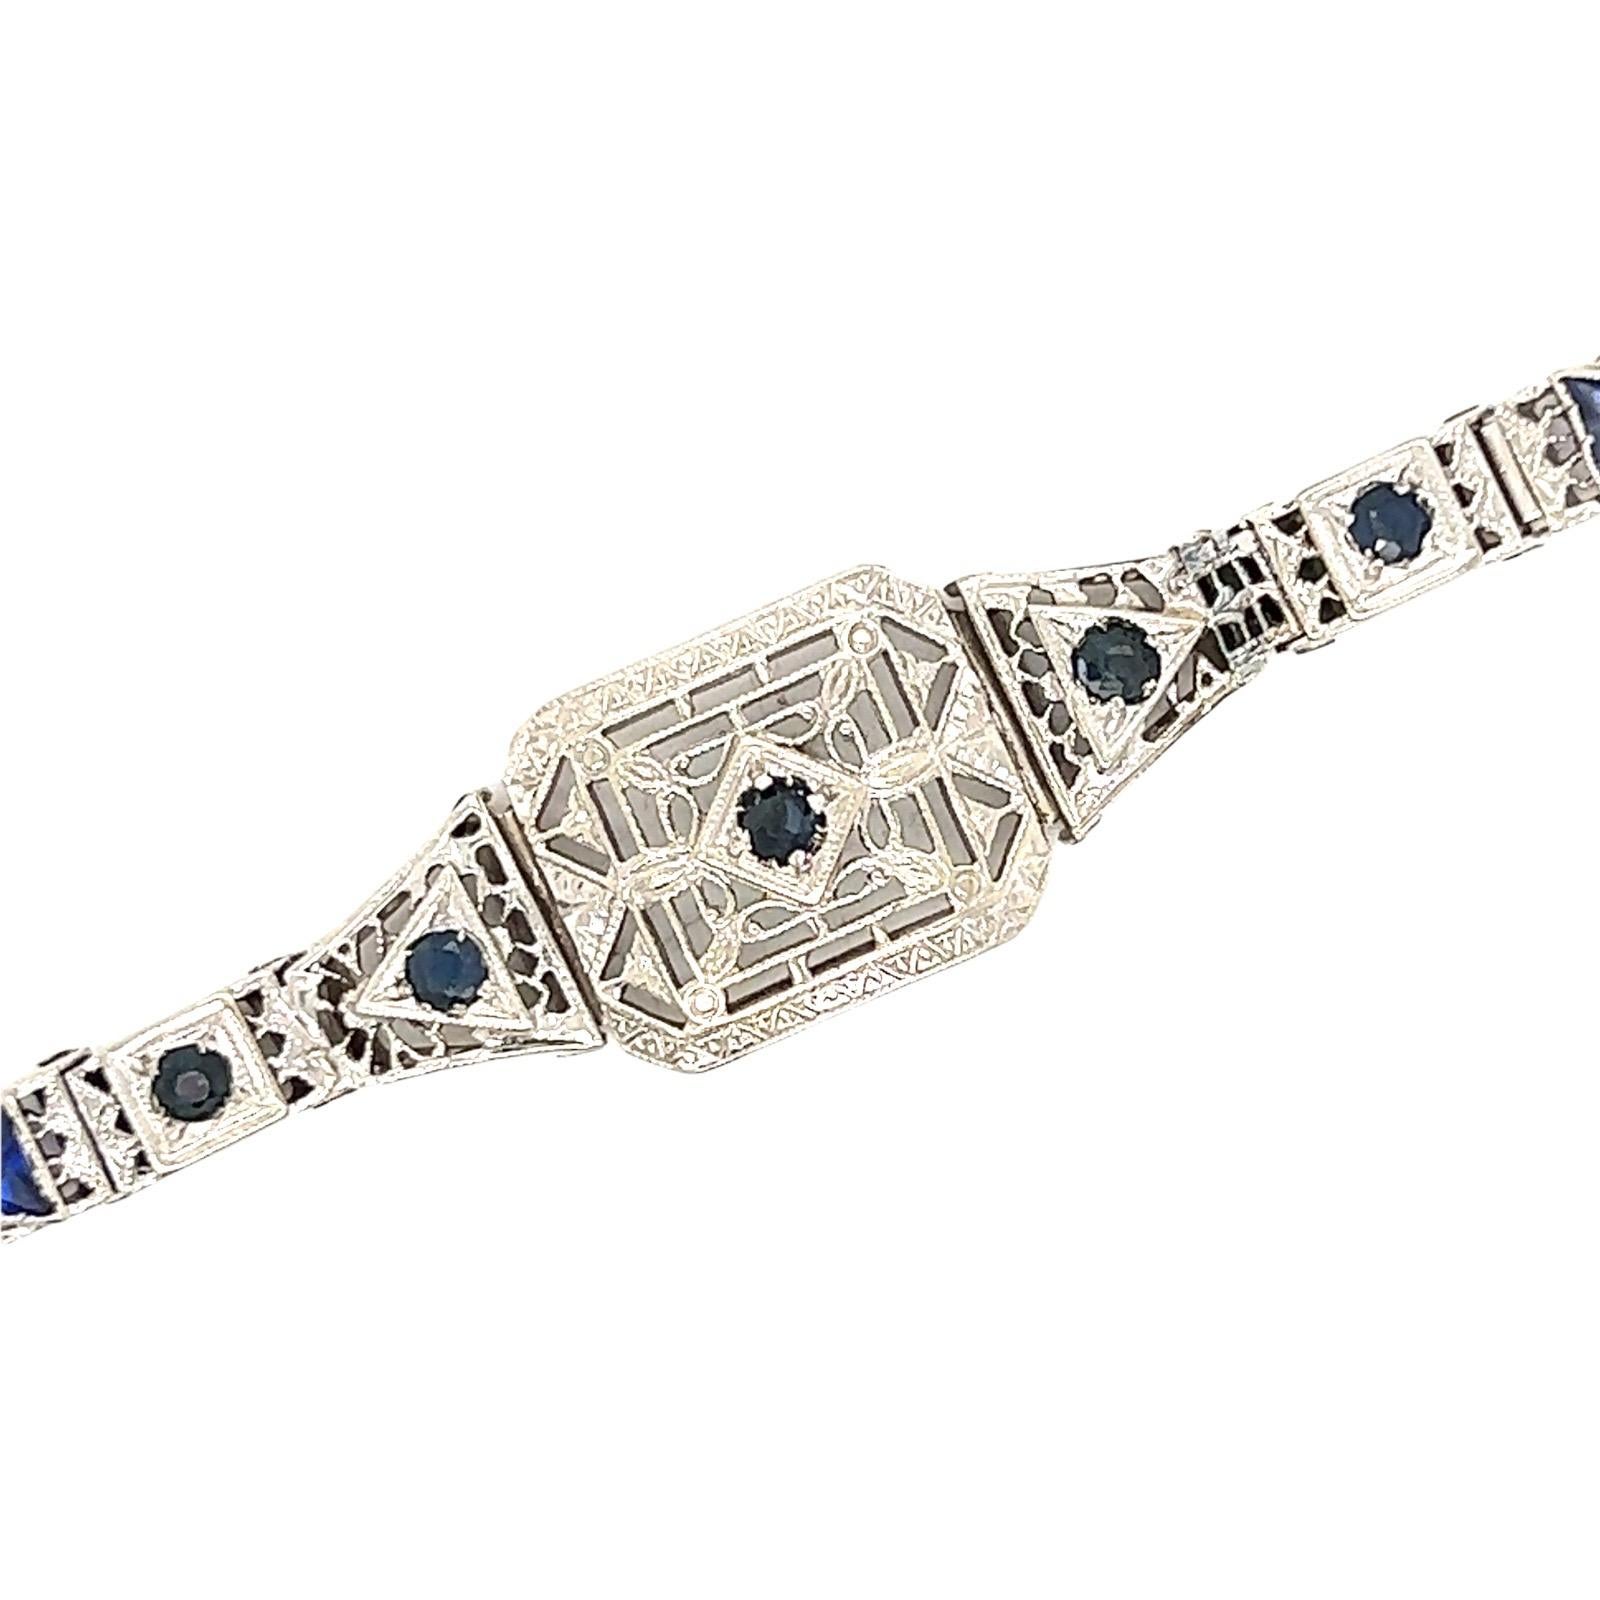 Original Art Deco filigree bracelet crafted in 14 karat white gold. The bracelet features synthetic sapphire accents which were indicative of the time. The bracelet measures 7.0 inches in length, .50 inches in width, and features box clasp with